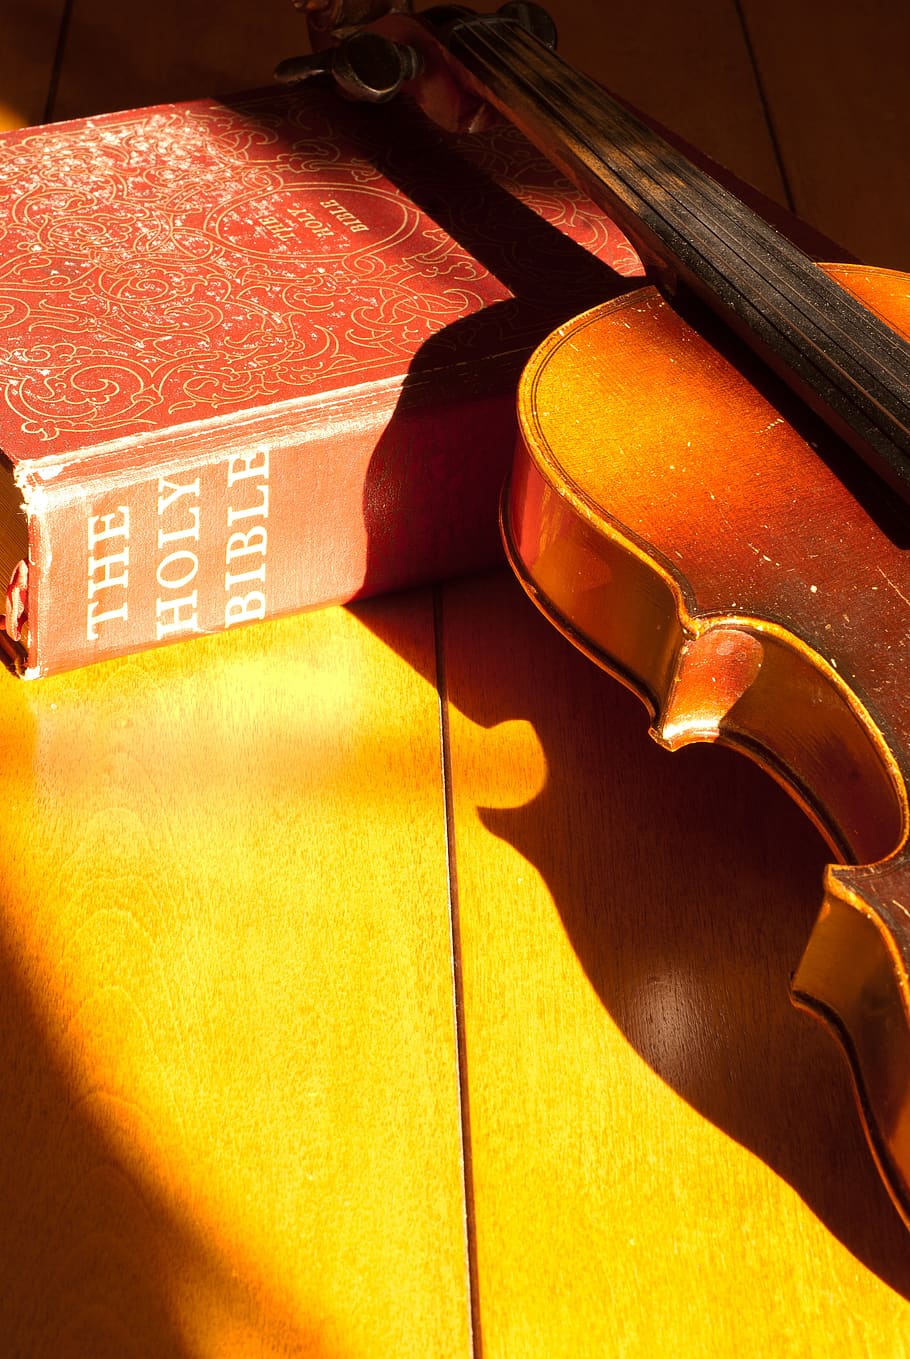 bible, fiddle, music, vintage, close-up, string instrument, indoors, sunlight, shadow, arts culture and entertainment